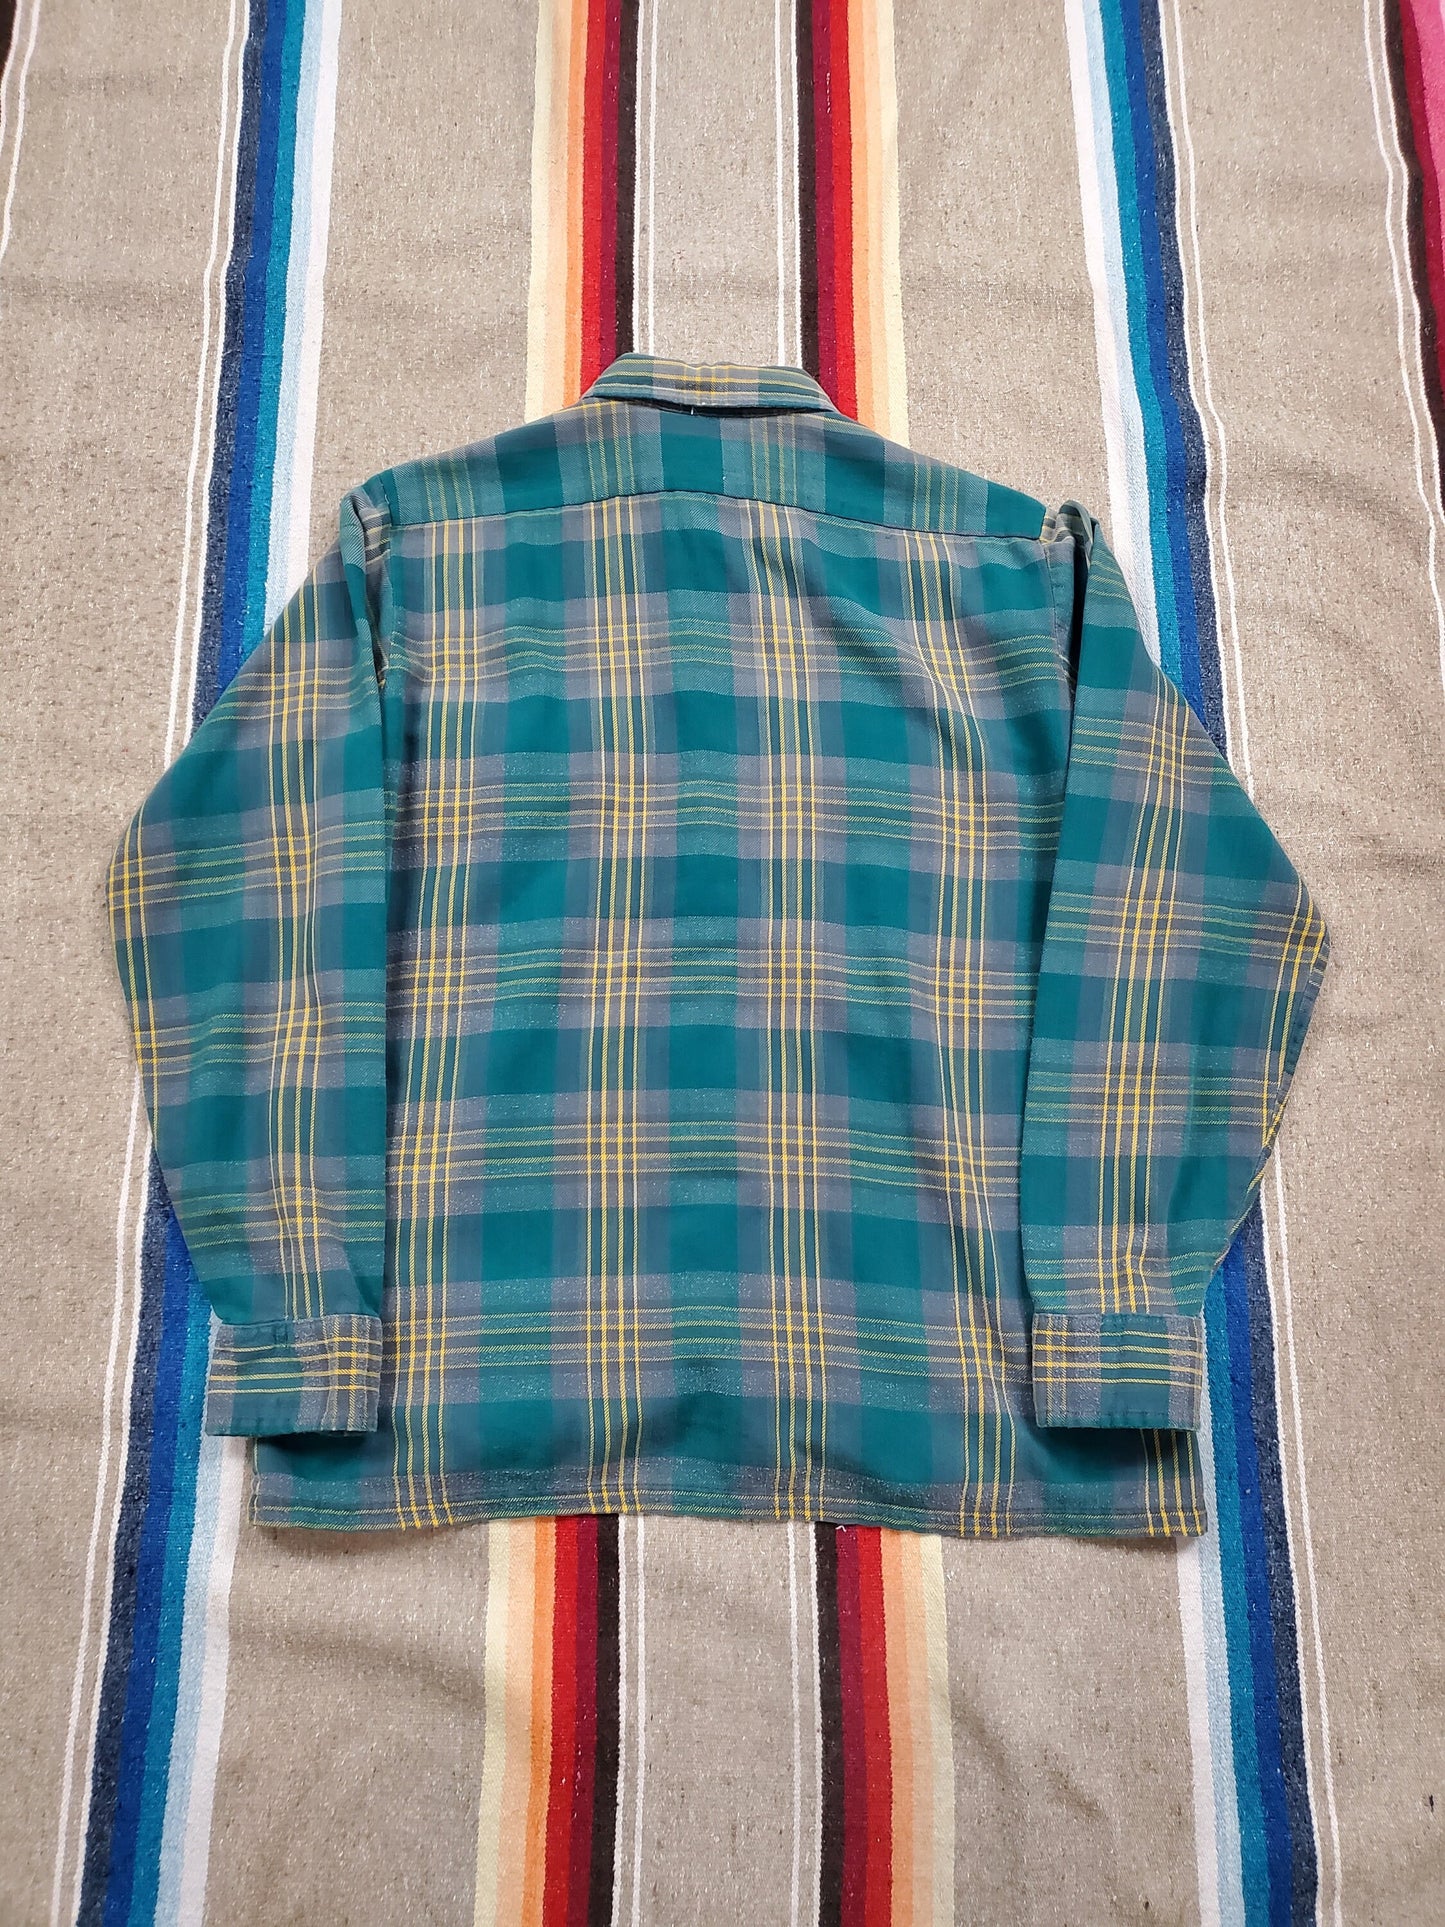 1980s Green/Grey Plaid Flannel Shirt Size S